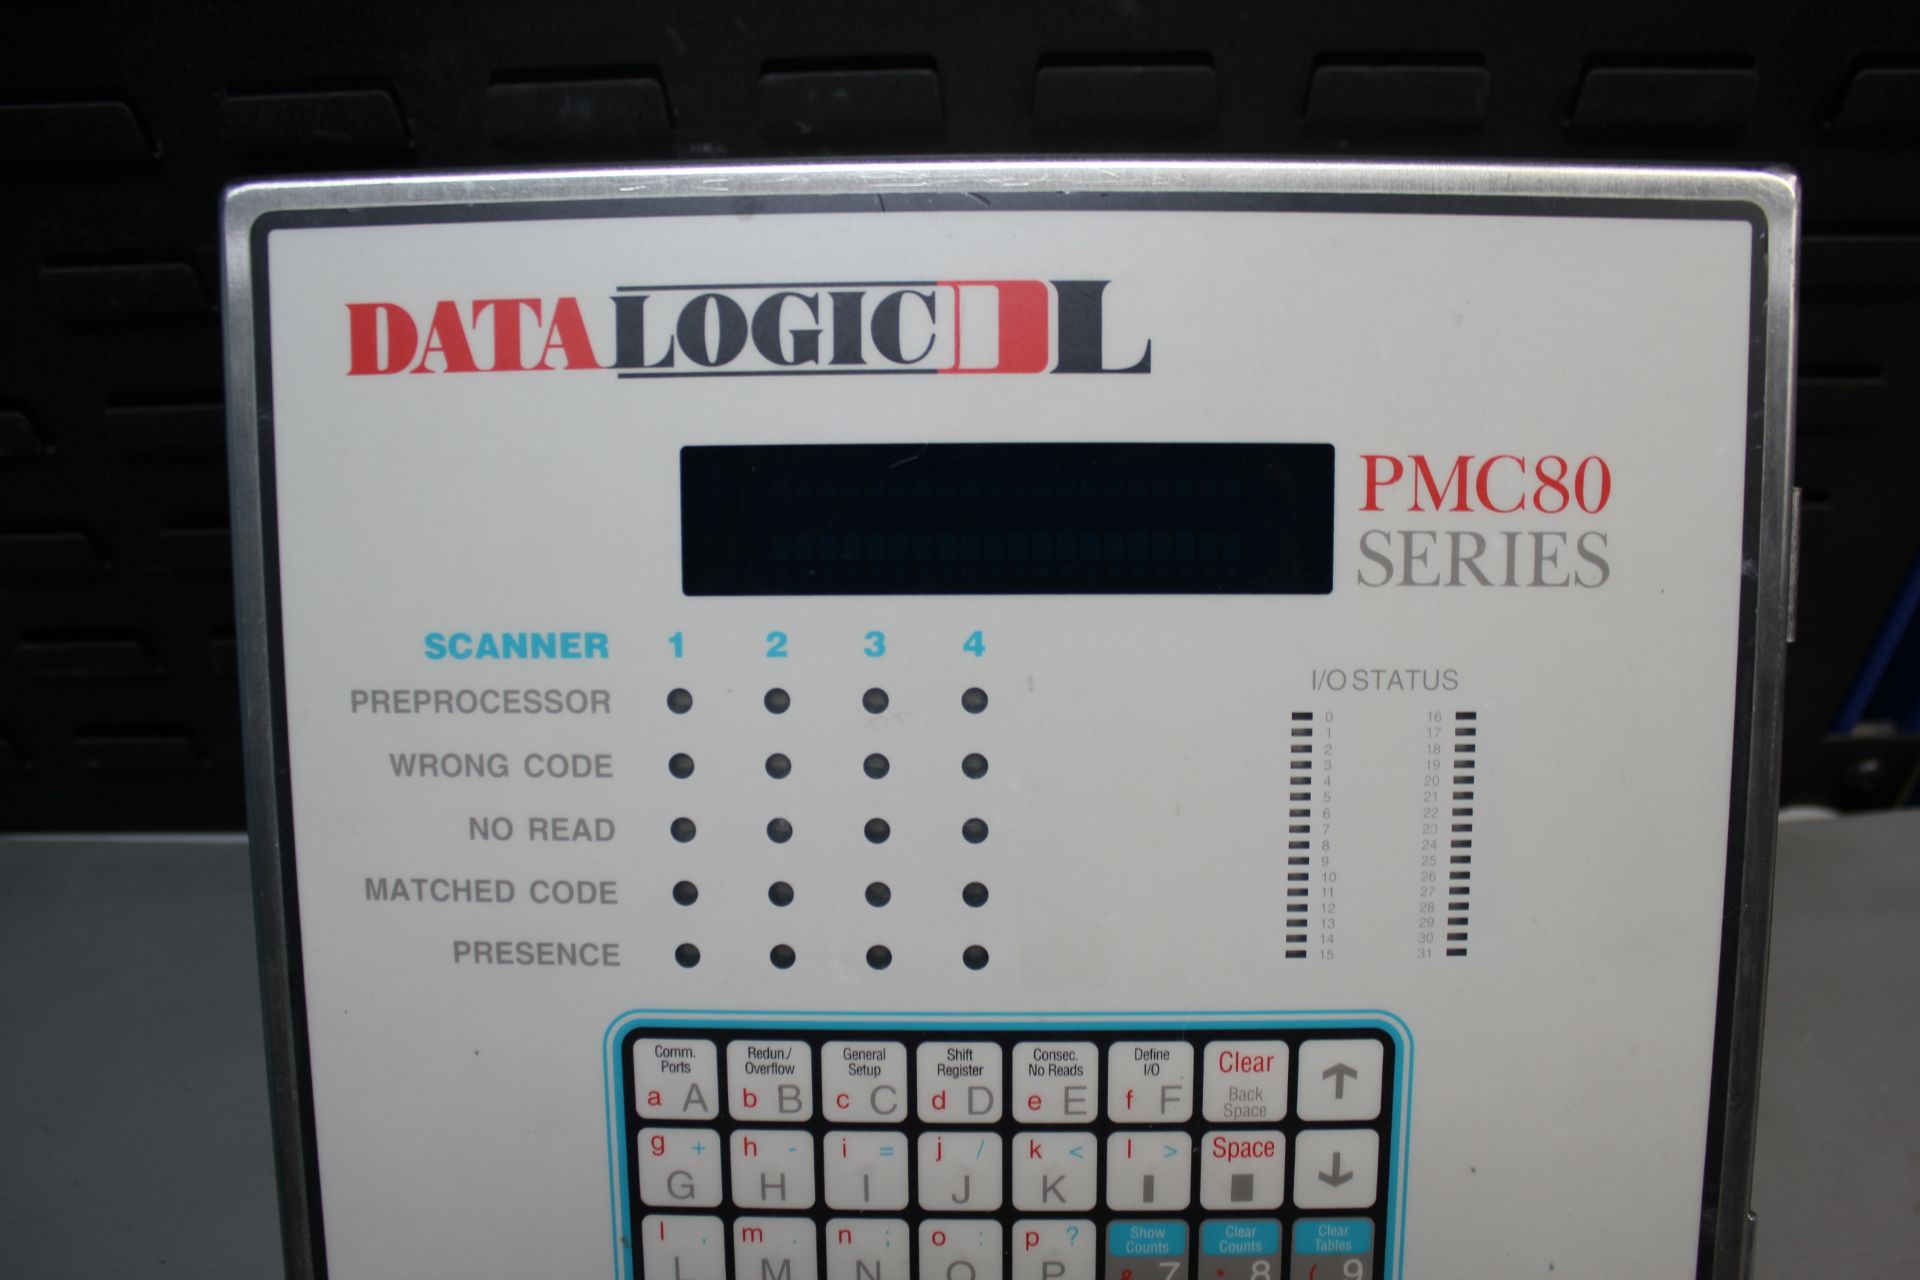 DATALOGIC PMC80 SERIES SCANNER CONTROL PANEL - Image 2 of 9